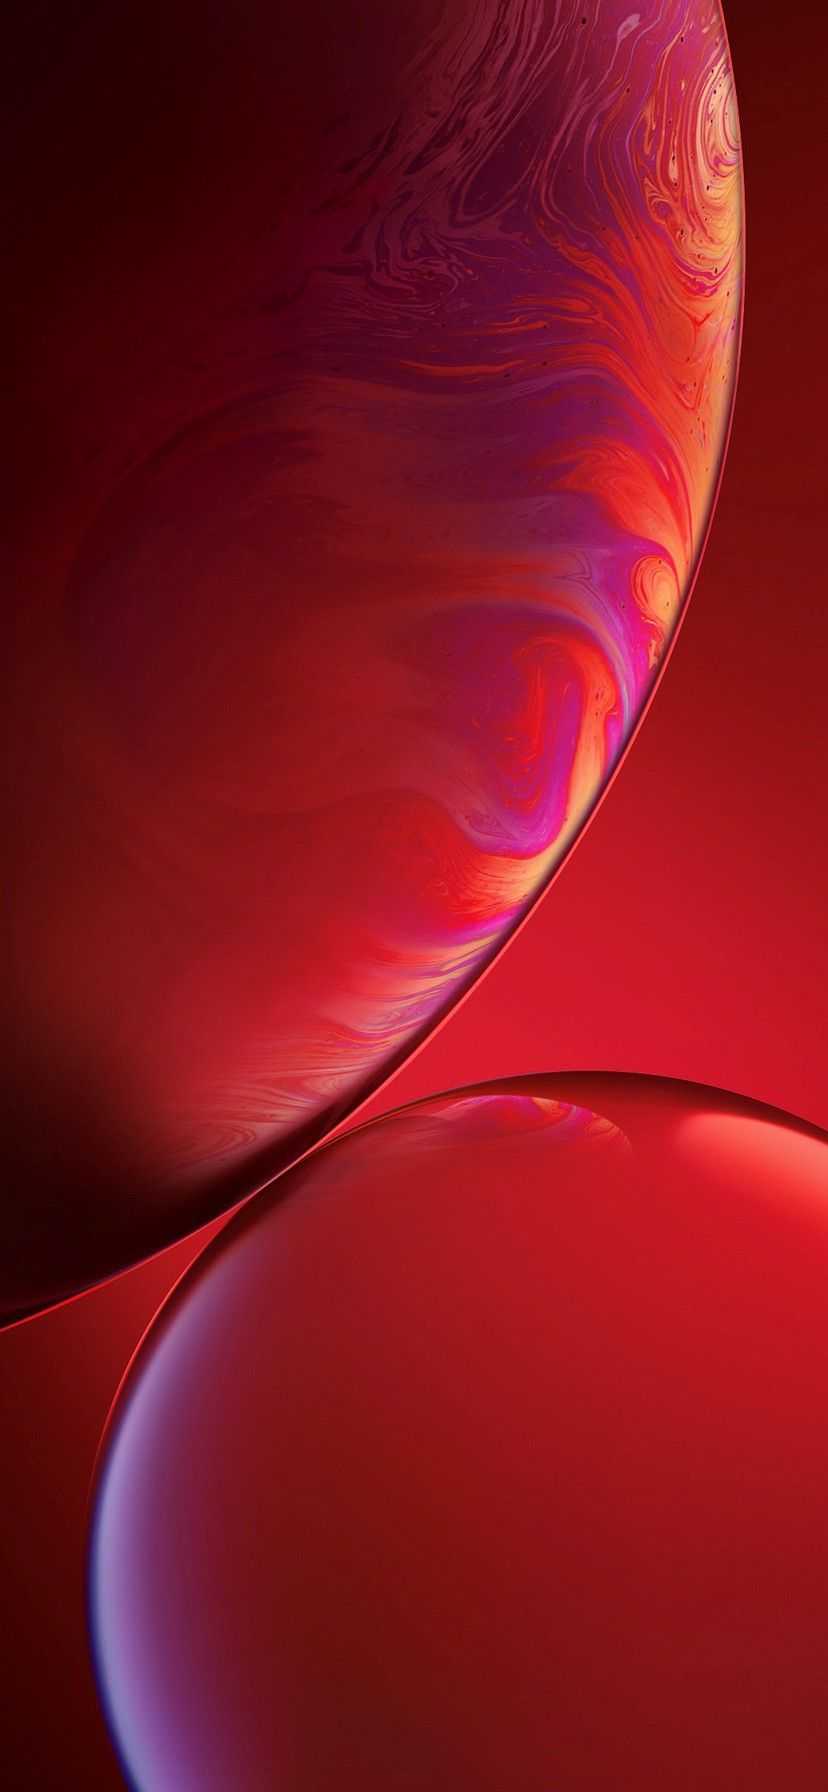 Iphone Xr Wallpaper Nawpic